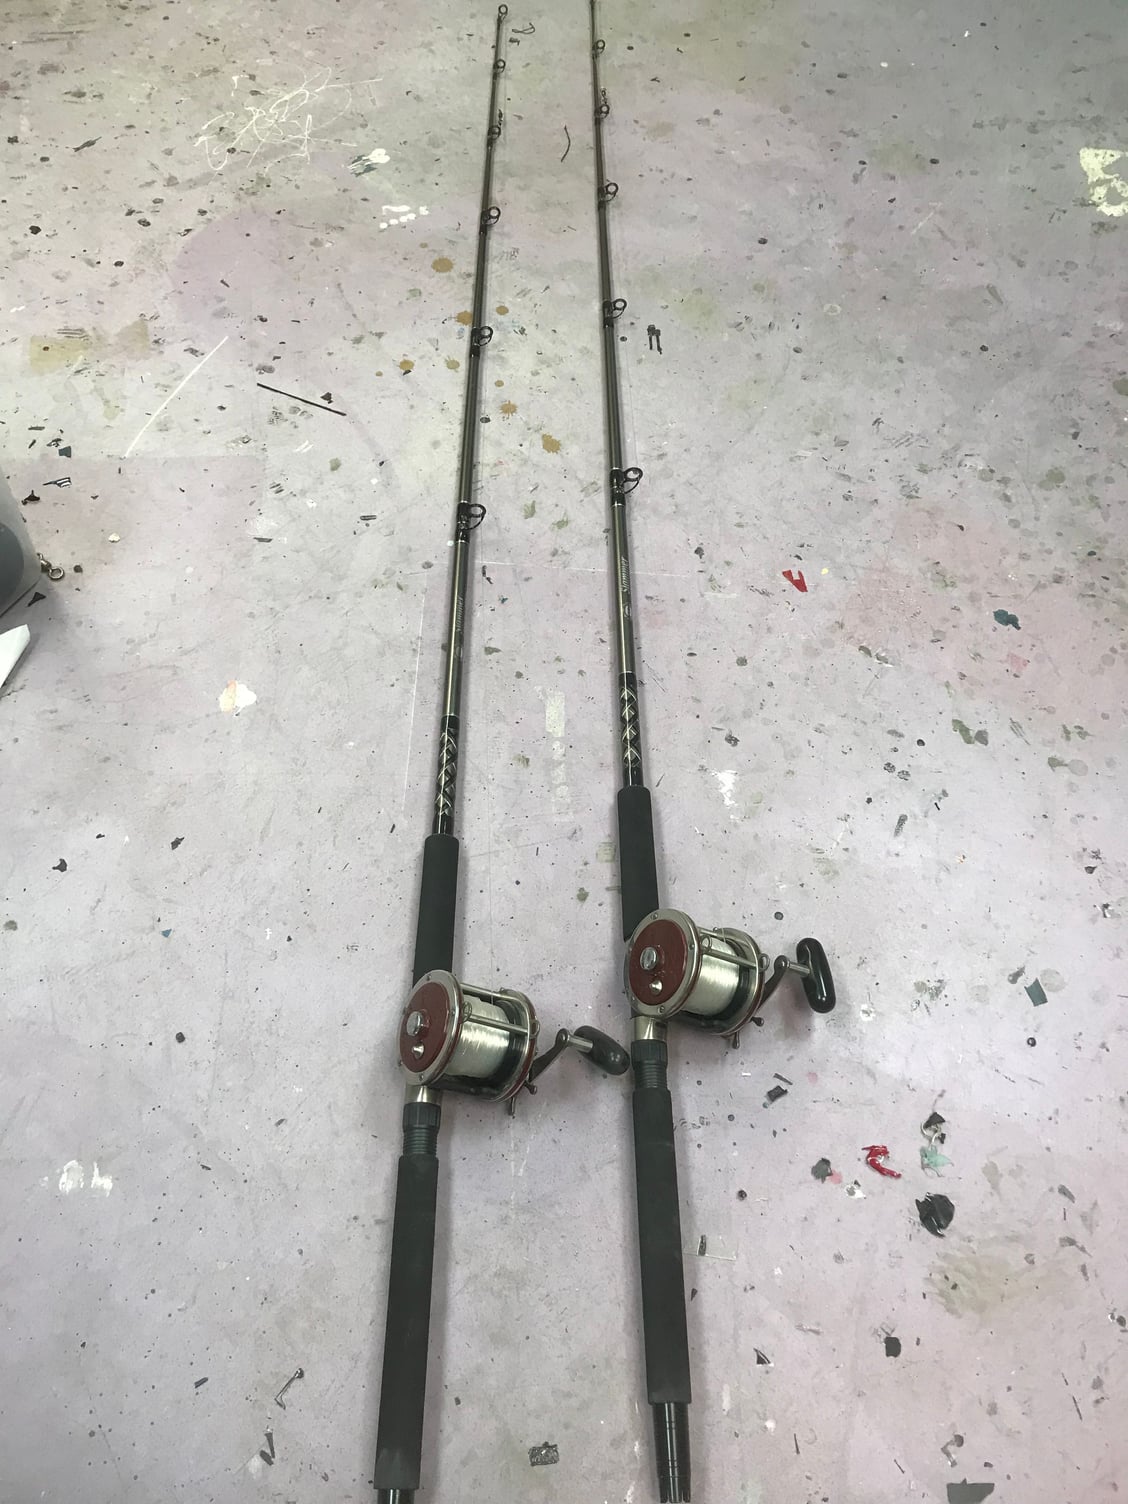 Penn slammer rod and high speed senator combo matched pair - The Hull Truth  - Boating and Fishing Forum